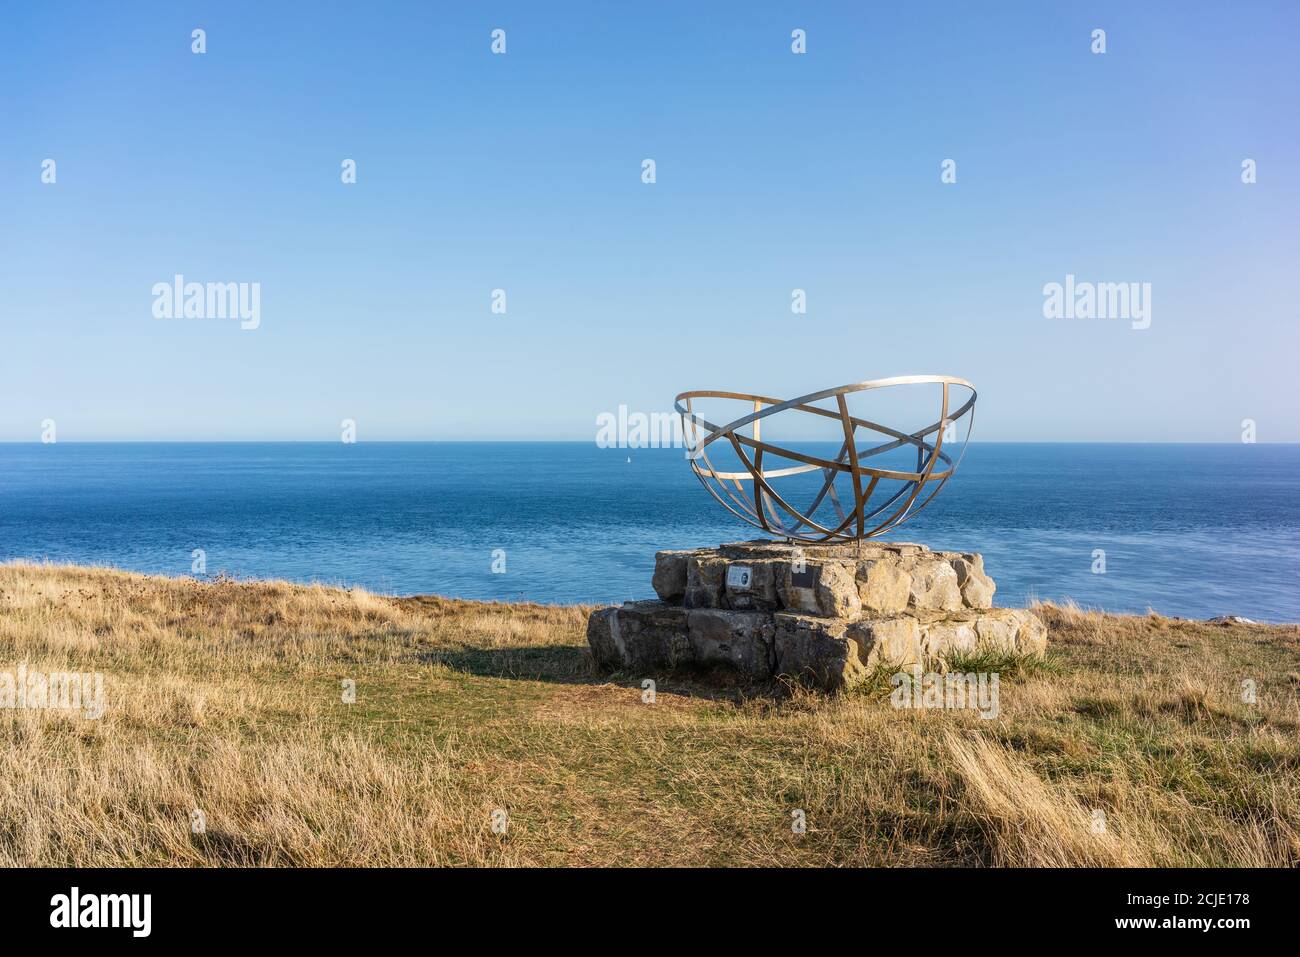 Radar Memorial also known as Purbeck Radar at St Aldhelm's Head located on a Purbeck stone plinth, Dorset, England, UK Stock Photo